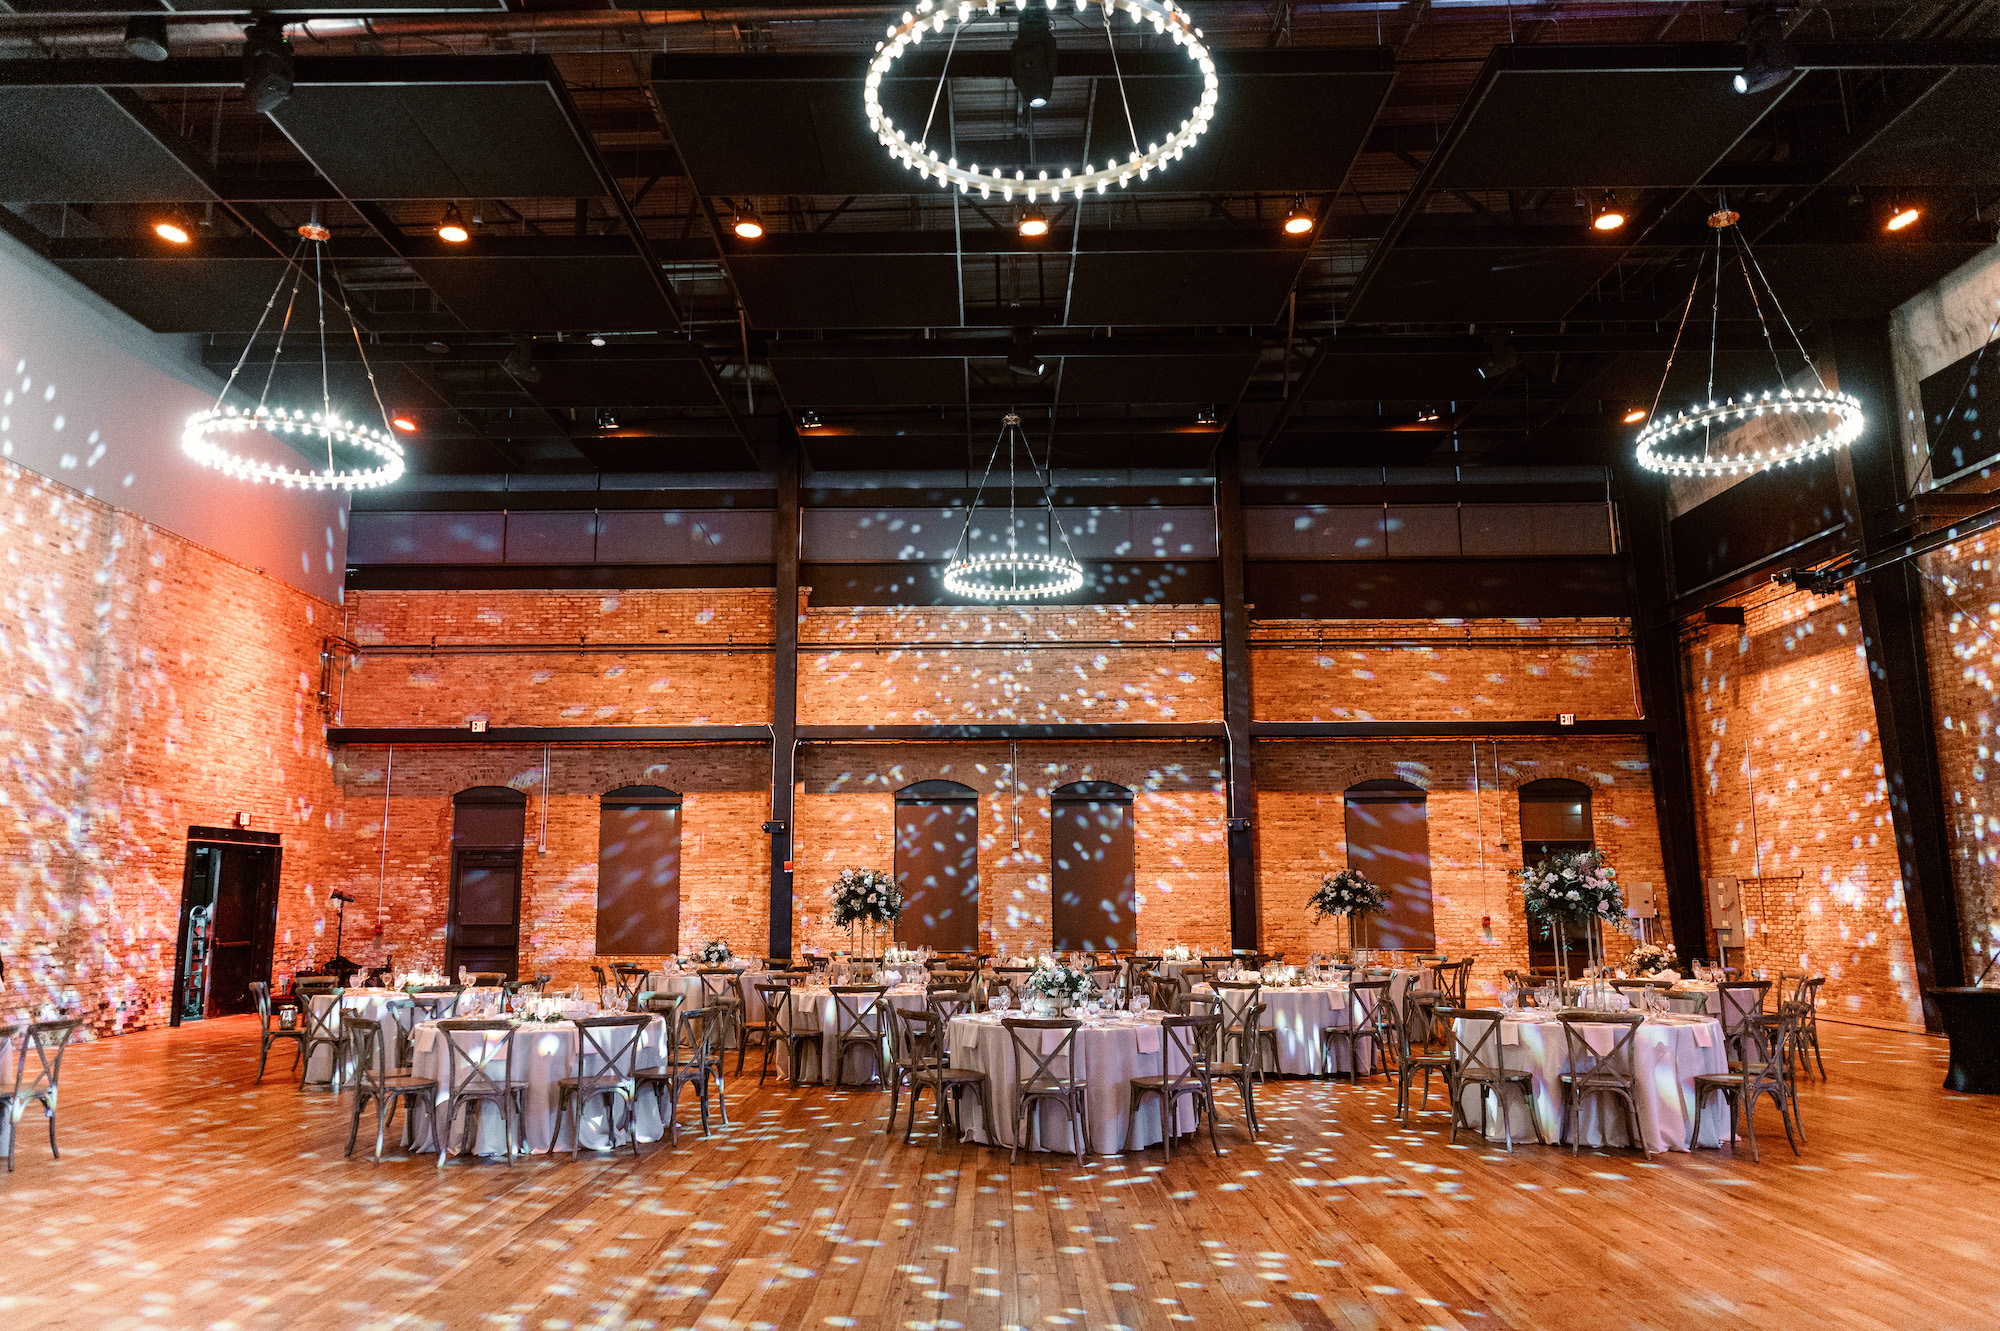 Indoor Industrial Reception with Chandeliers, Uplighting and Wooden Crossback Chairs | Tampa Wedding Armature Works The Gathering | Planner Coastal Coordinating